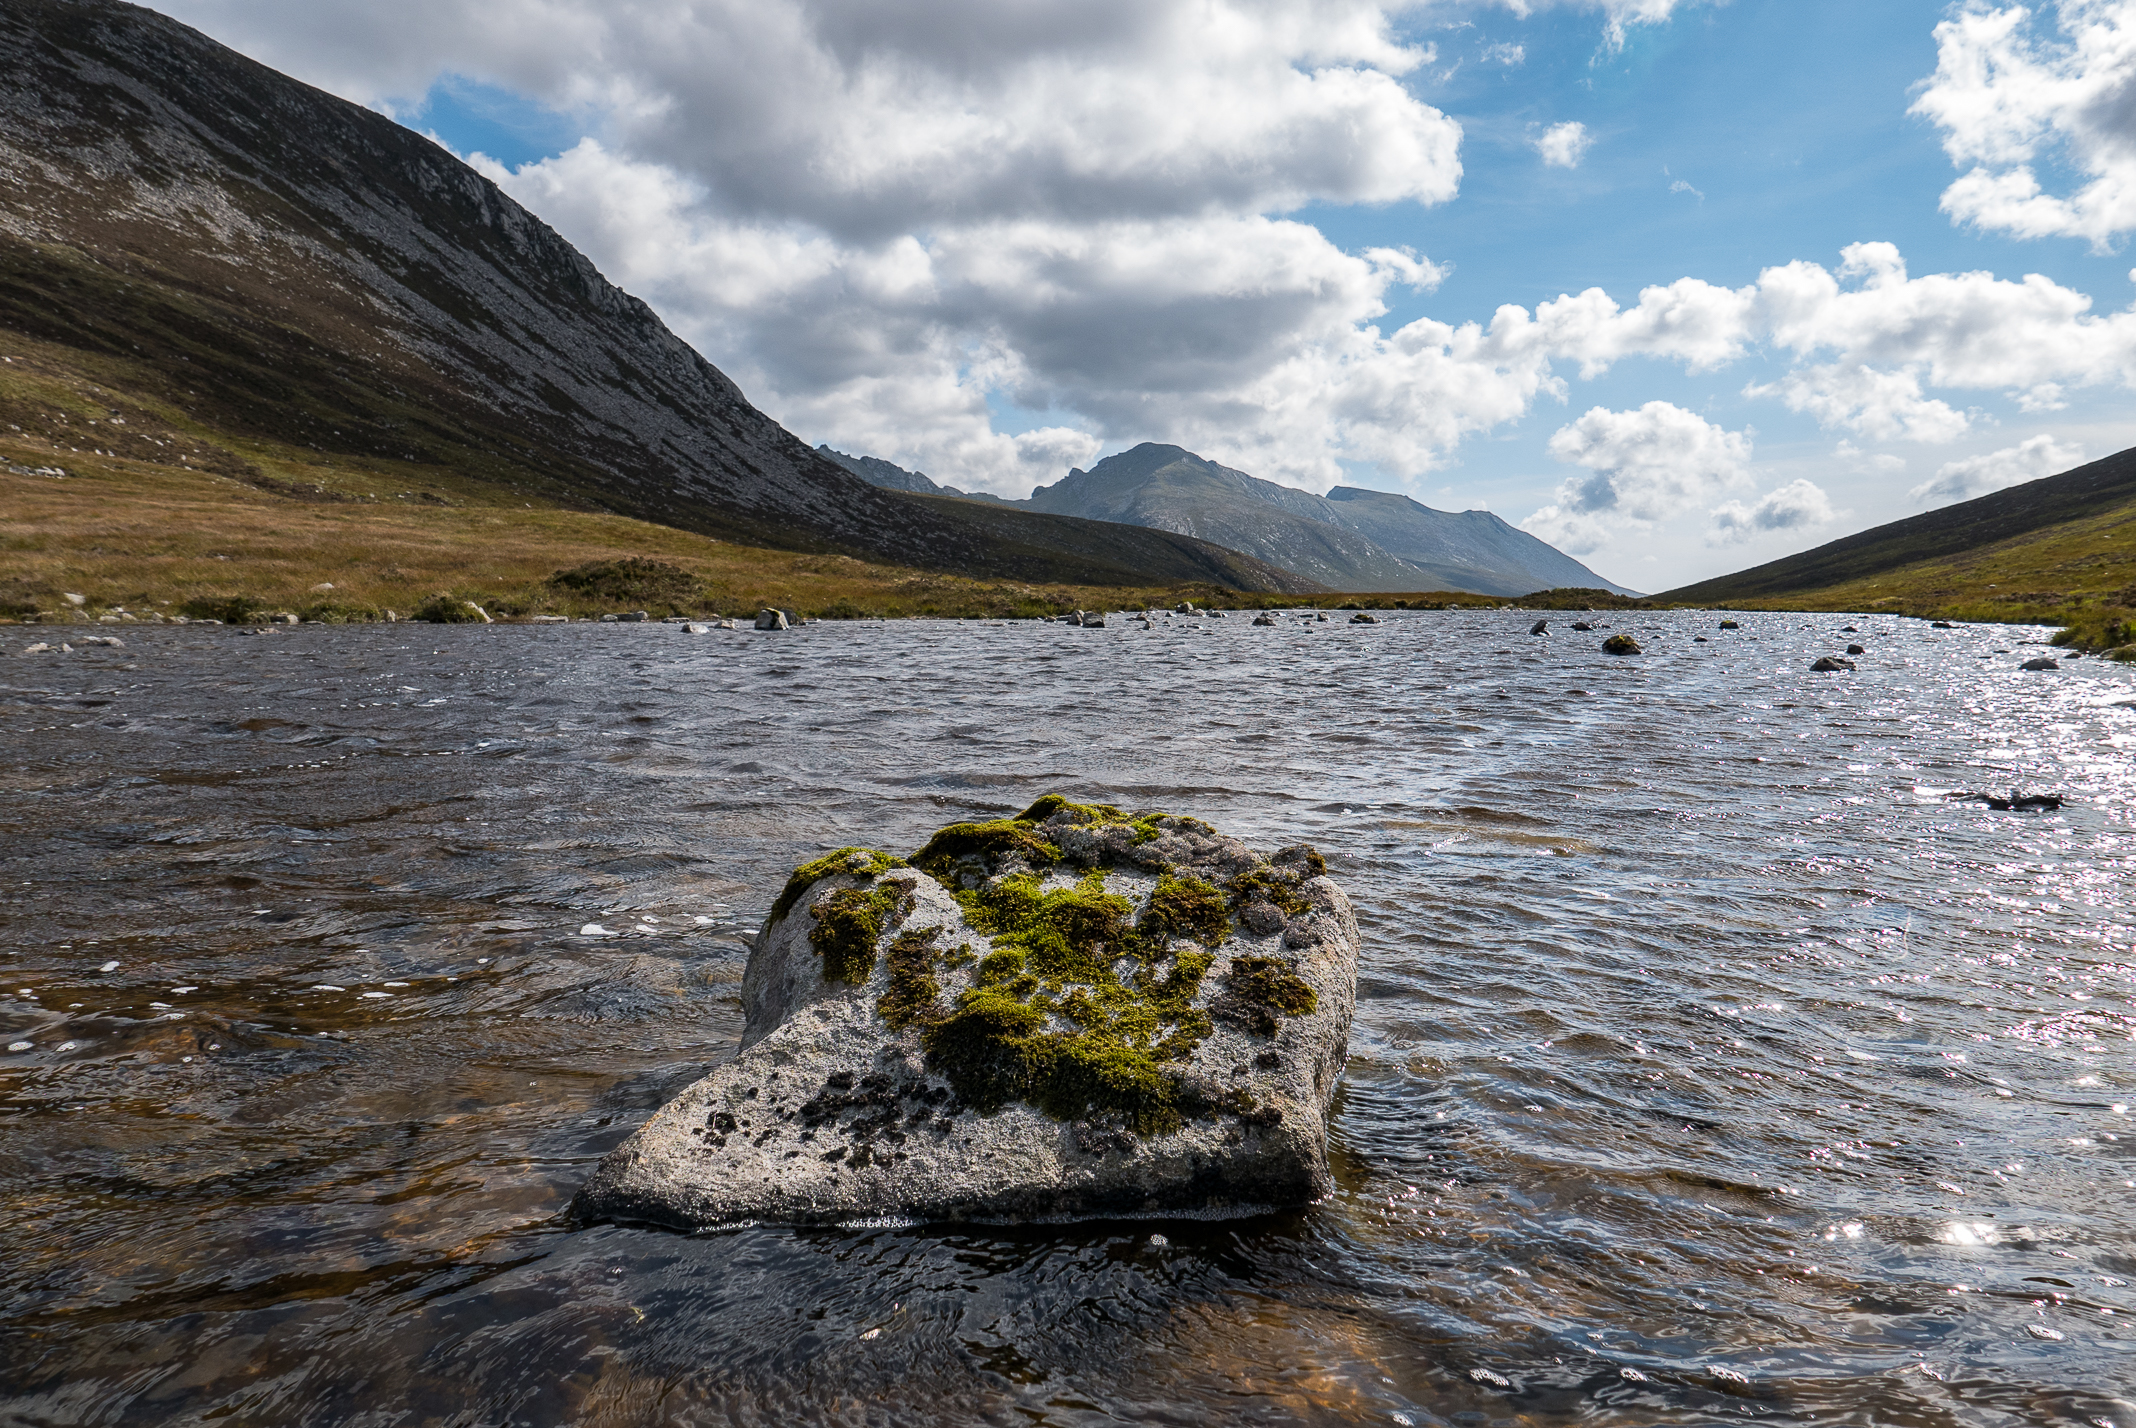 Moss covered rock sitting in Loch na Davie with mountain views